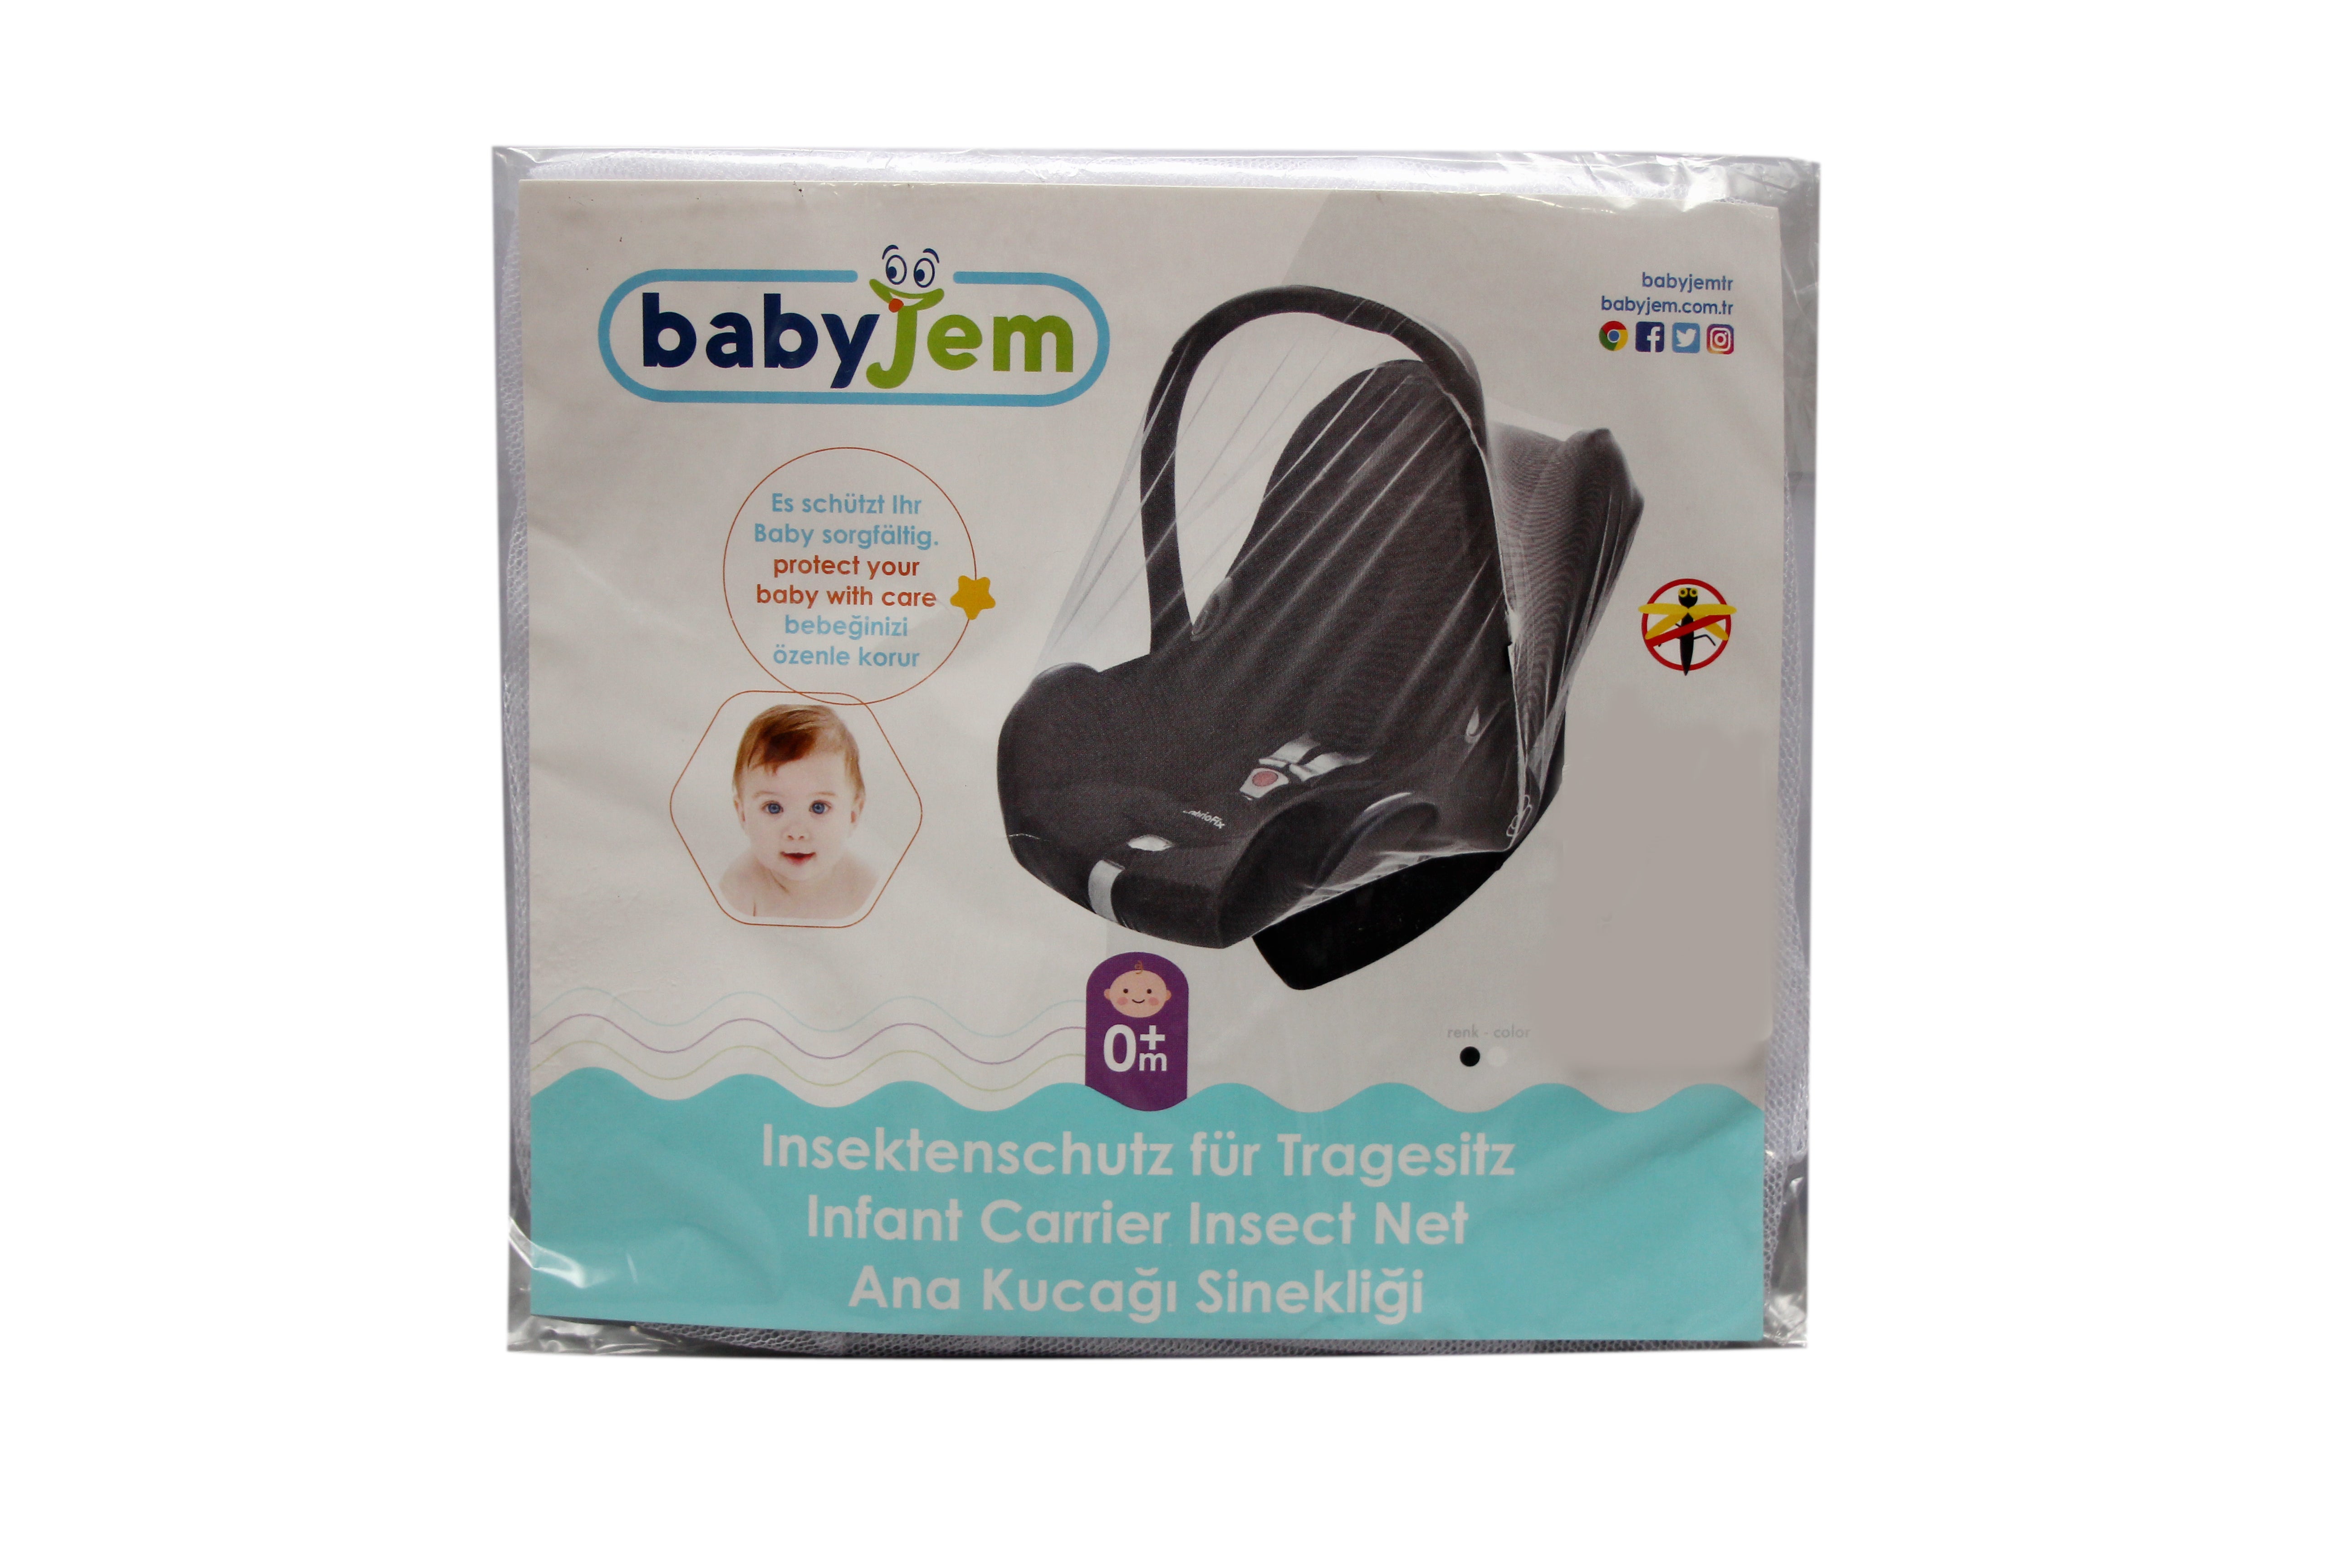 BABY CARRY COT MOSQUITO SAFETY NET - 26892